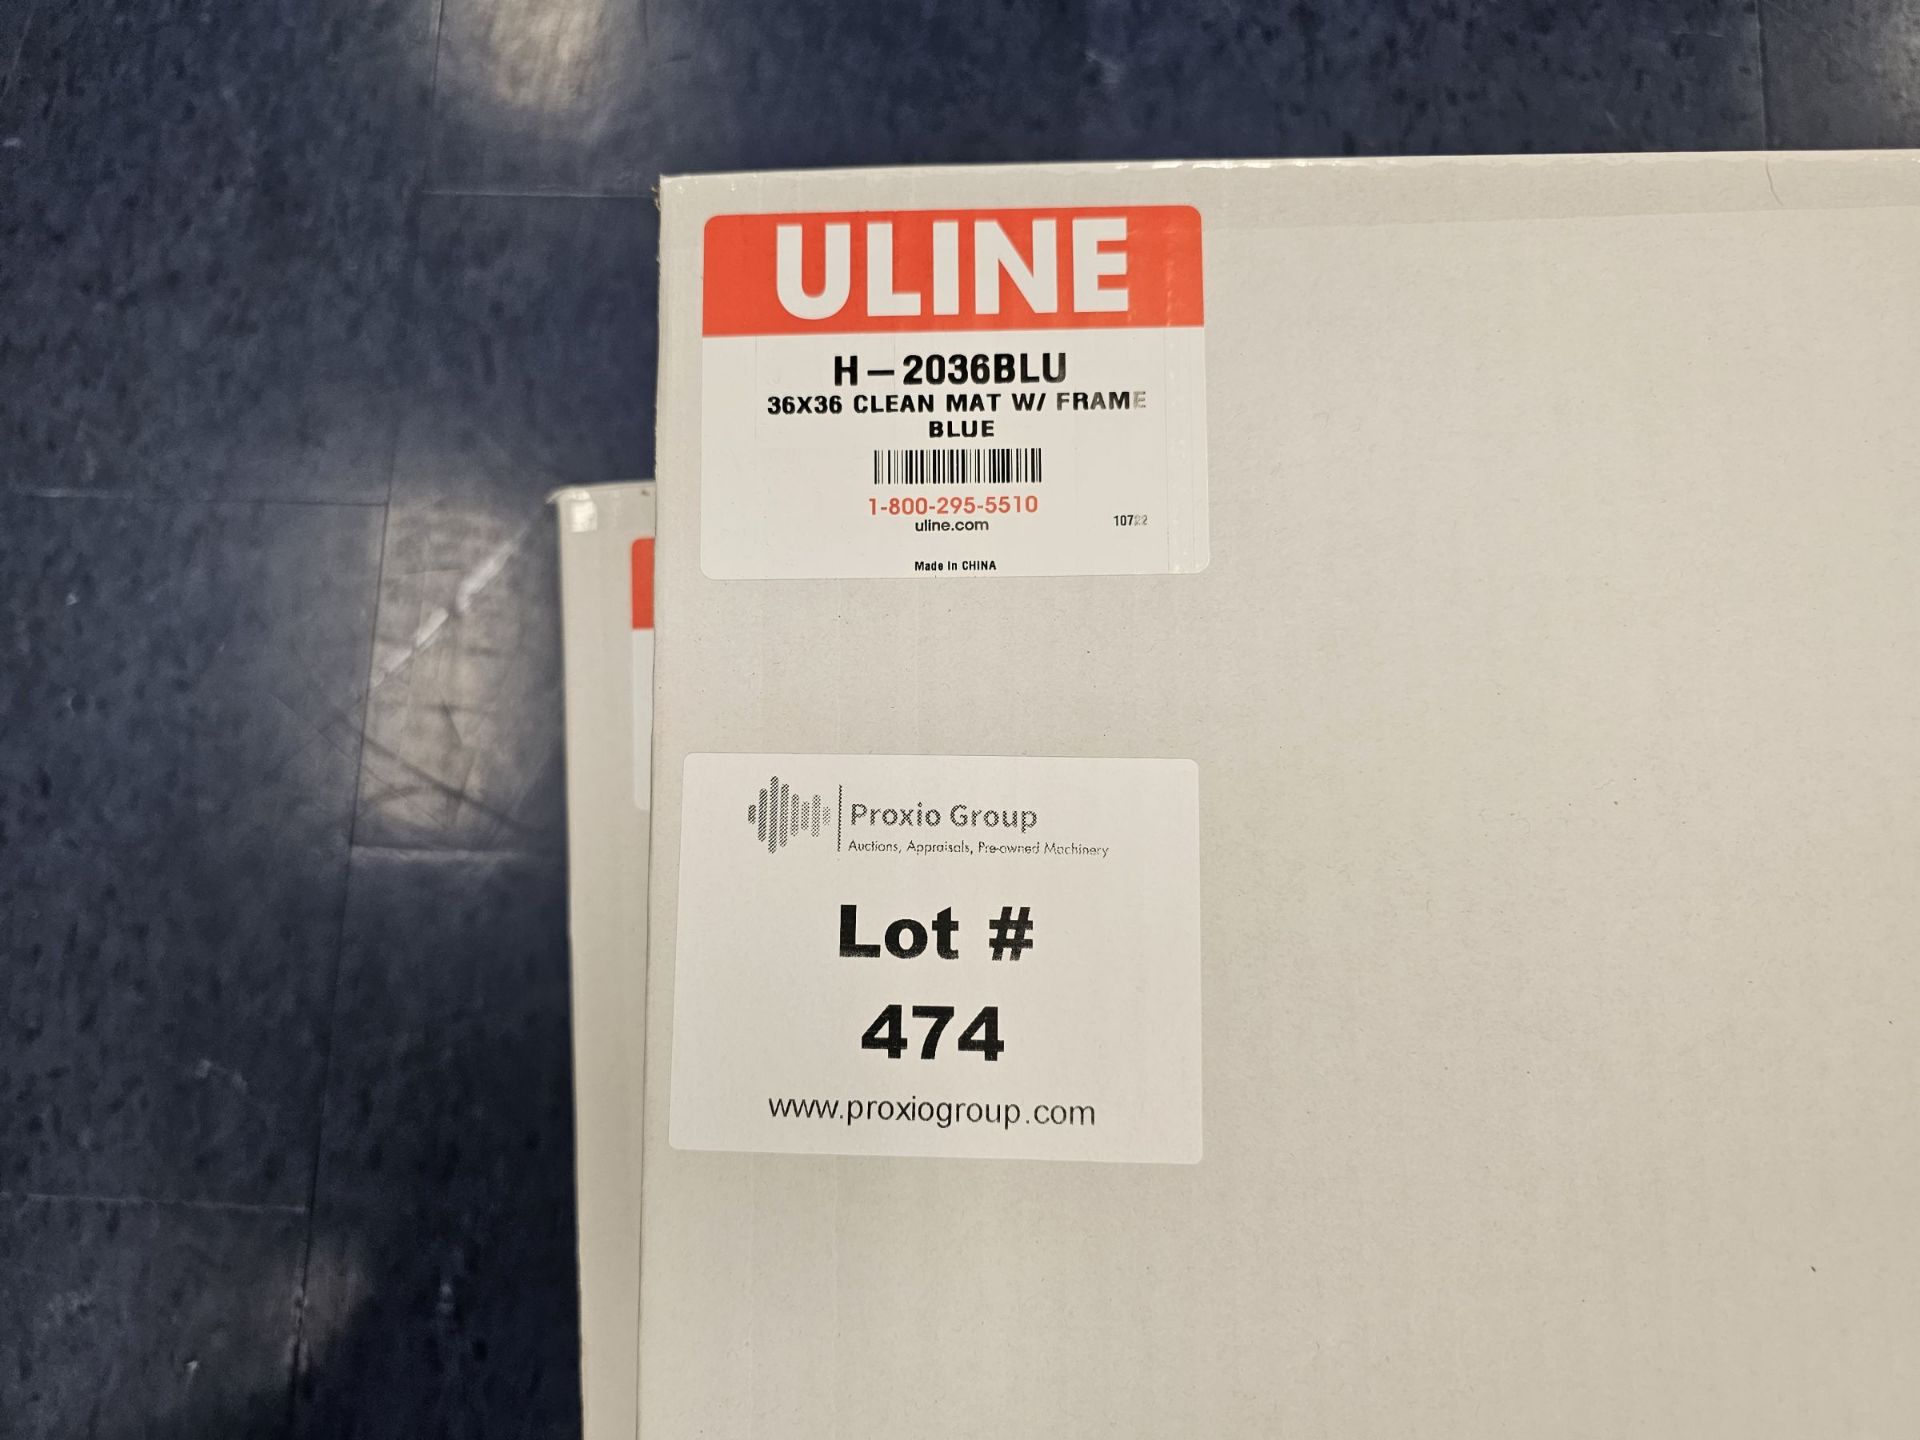 Skid Of Uline H-2036BLU 36" x 36" Cleanroom Entry Tacky Mats w/ Frames - Image 4 of 4